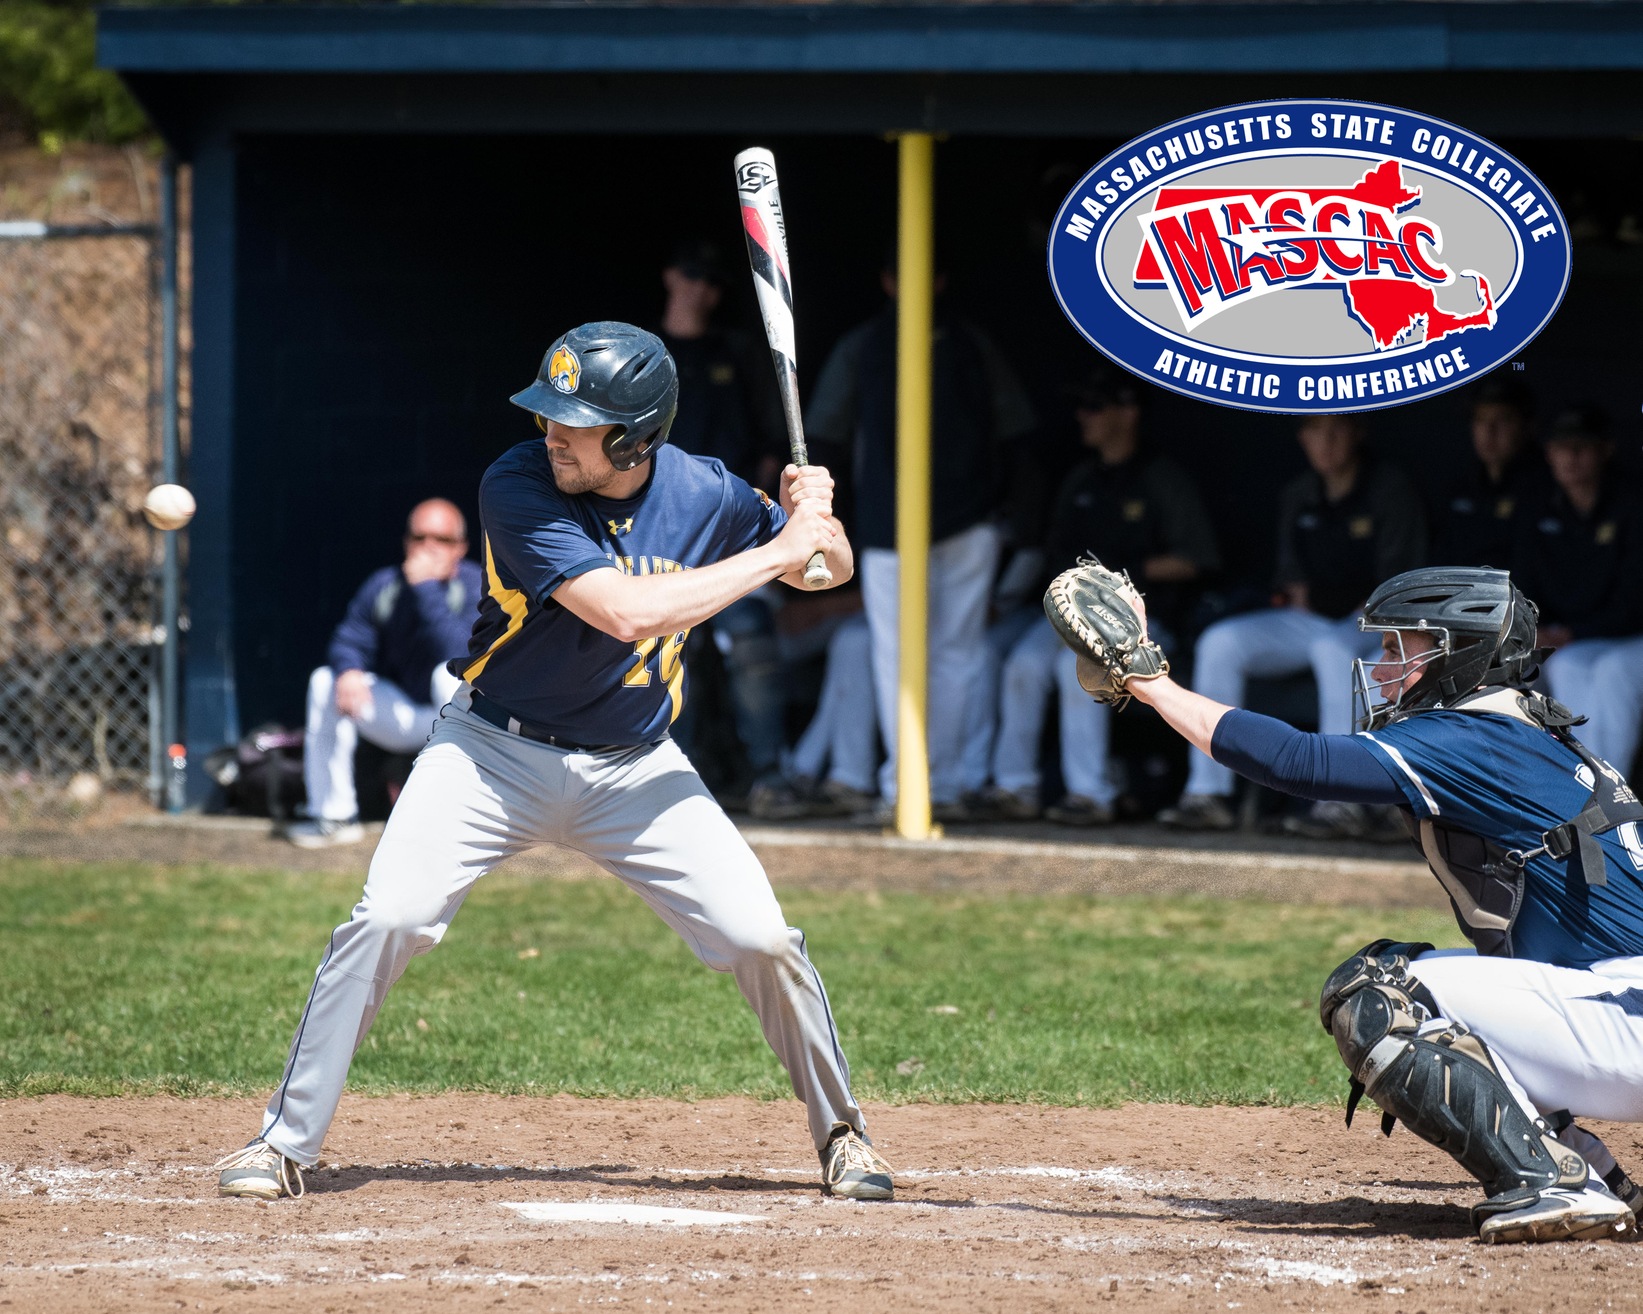 First year player Seariac named second team All MASCAC in Baseball